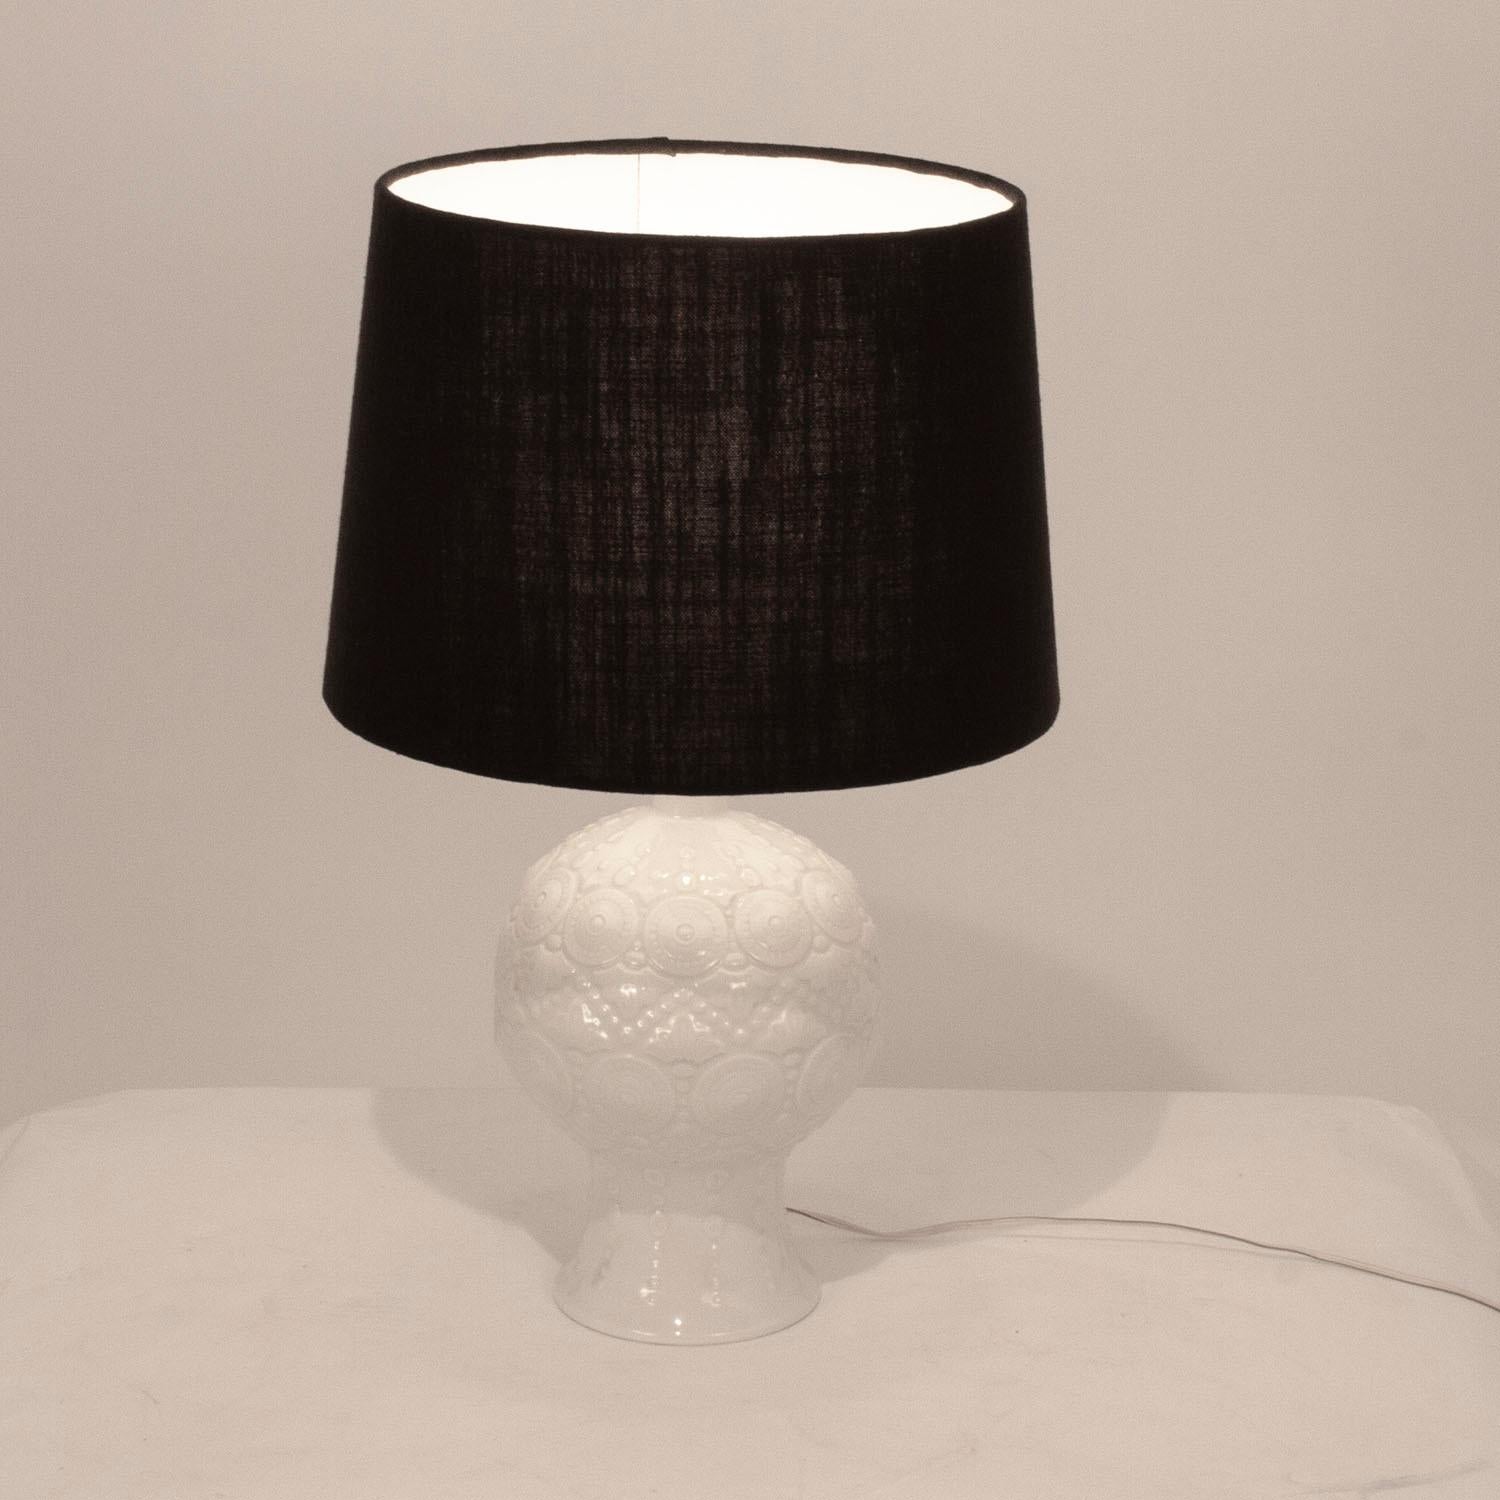 Spanish 1970s Mid-Century Modern Lladró white porcelain table lamp. New black shape in textil.
Good condition.
  